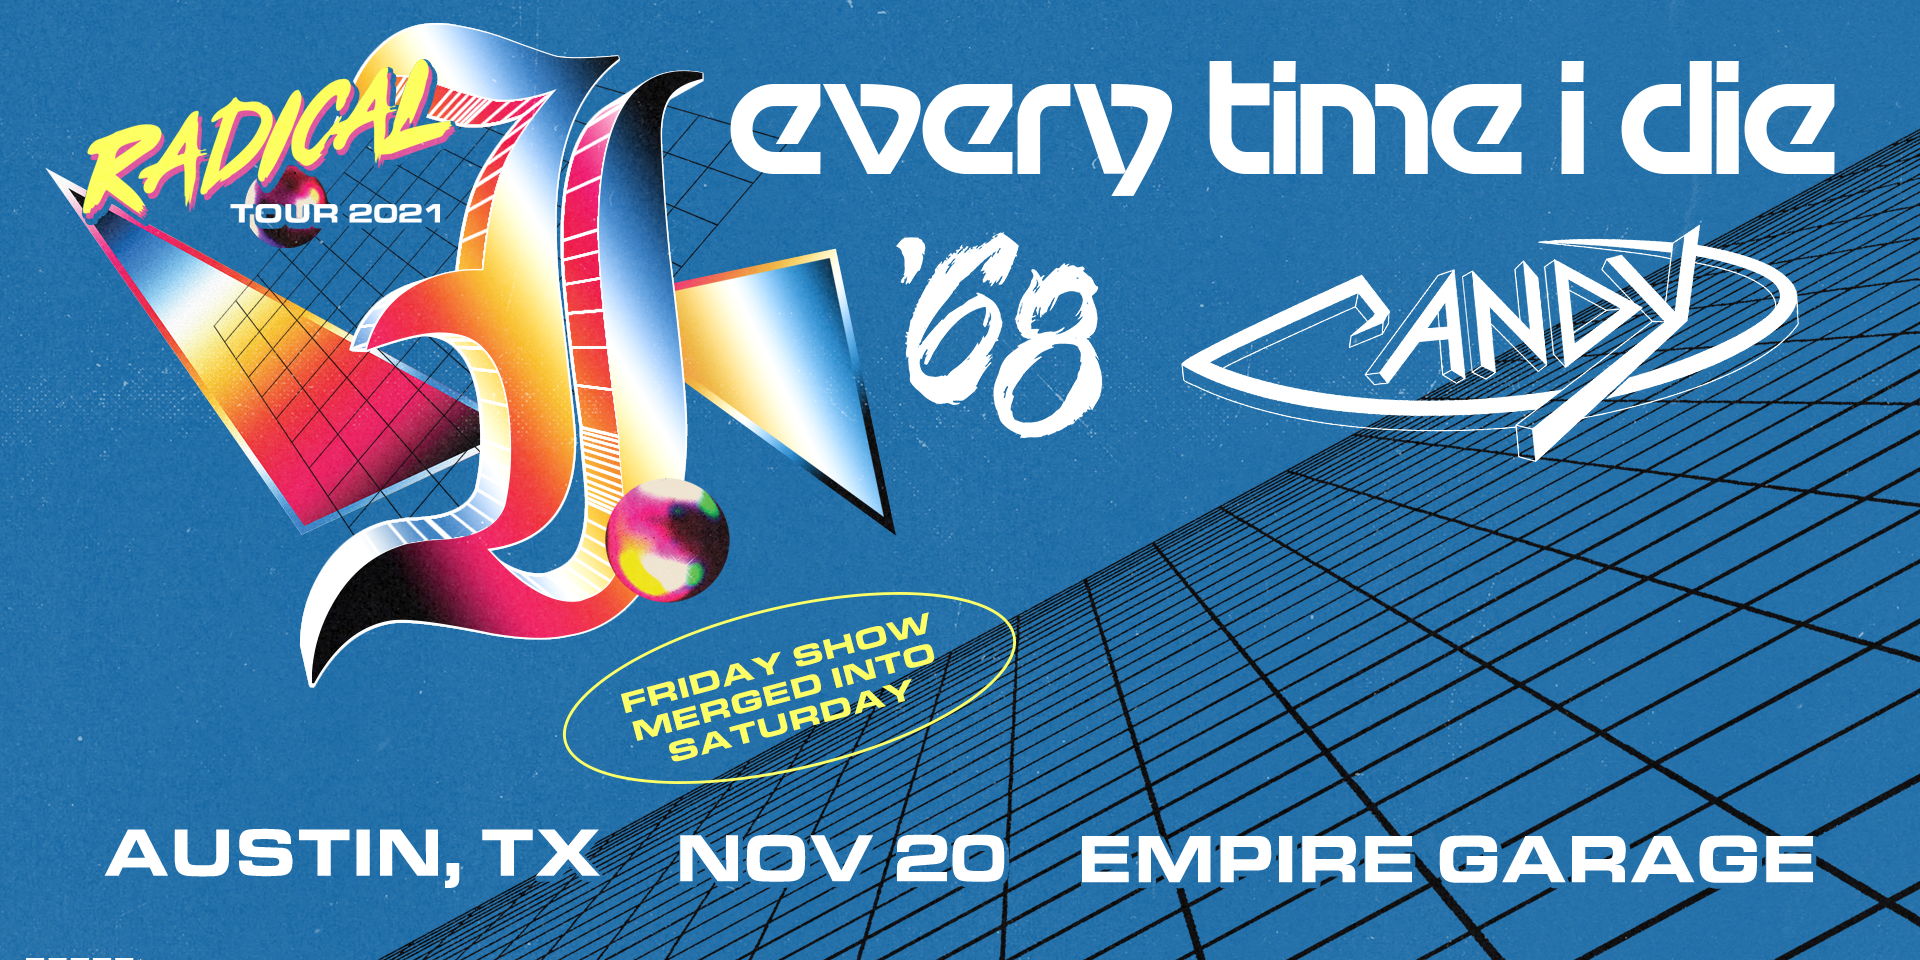 Every Time I Die - Radical Tour w/ ‘68 and Candy at Empire Garage 11/20 promotional image